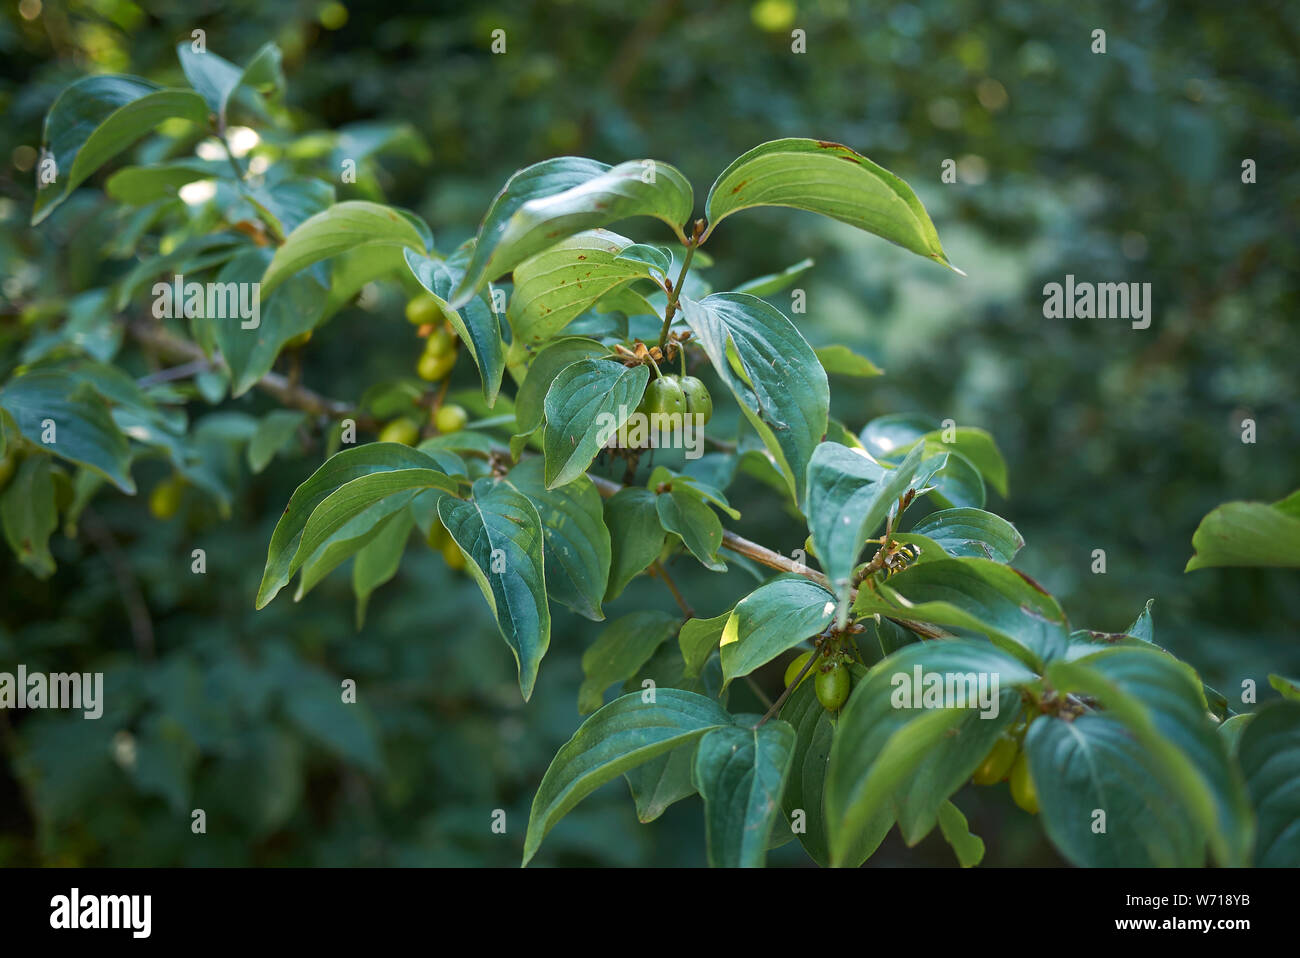 Cornus mas branch with fresh fruit and leaves Stock Photo